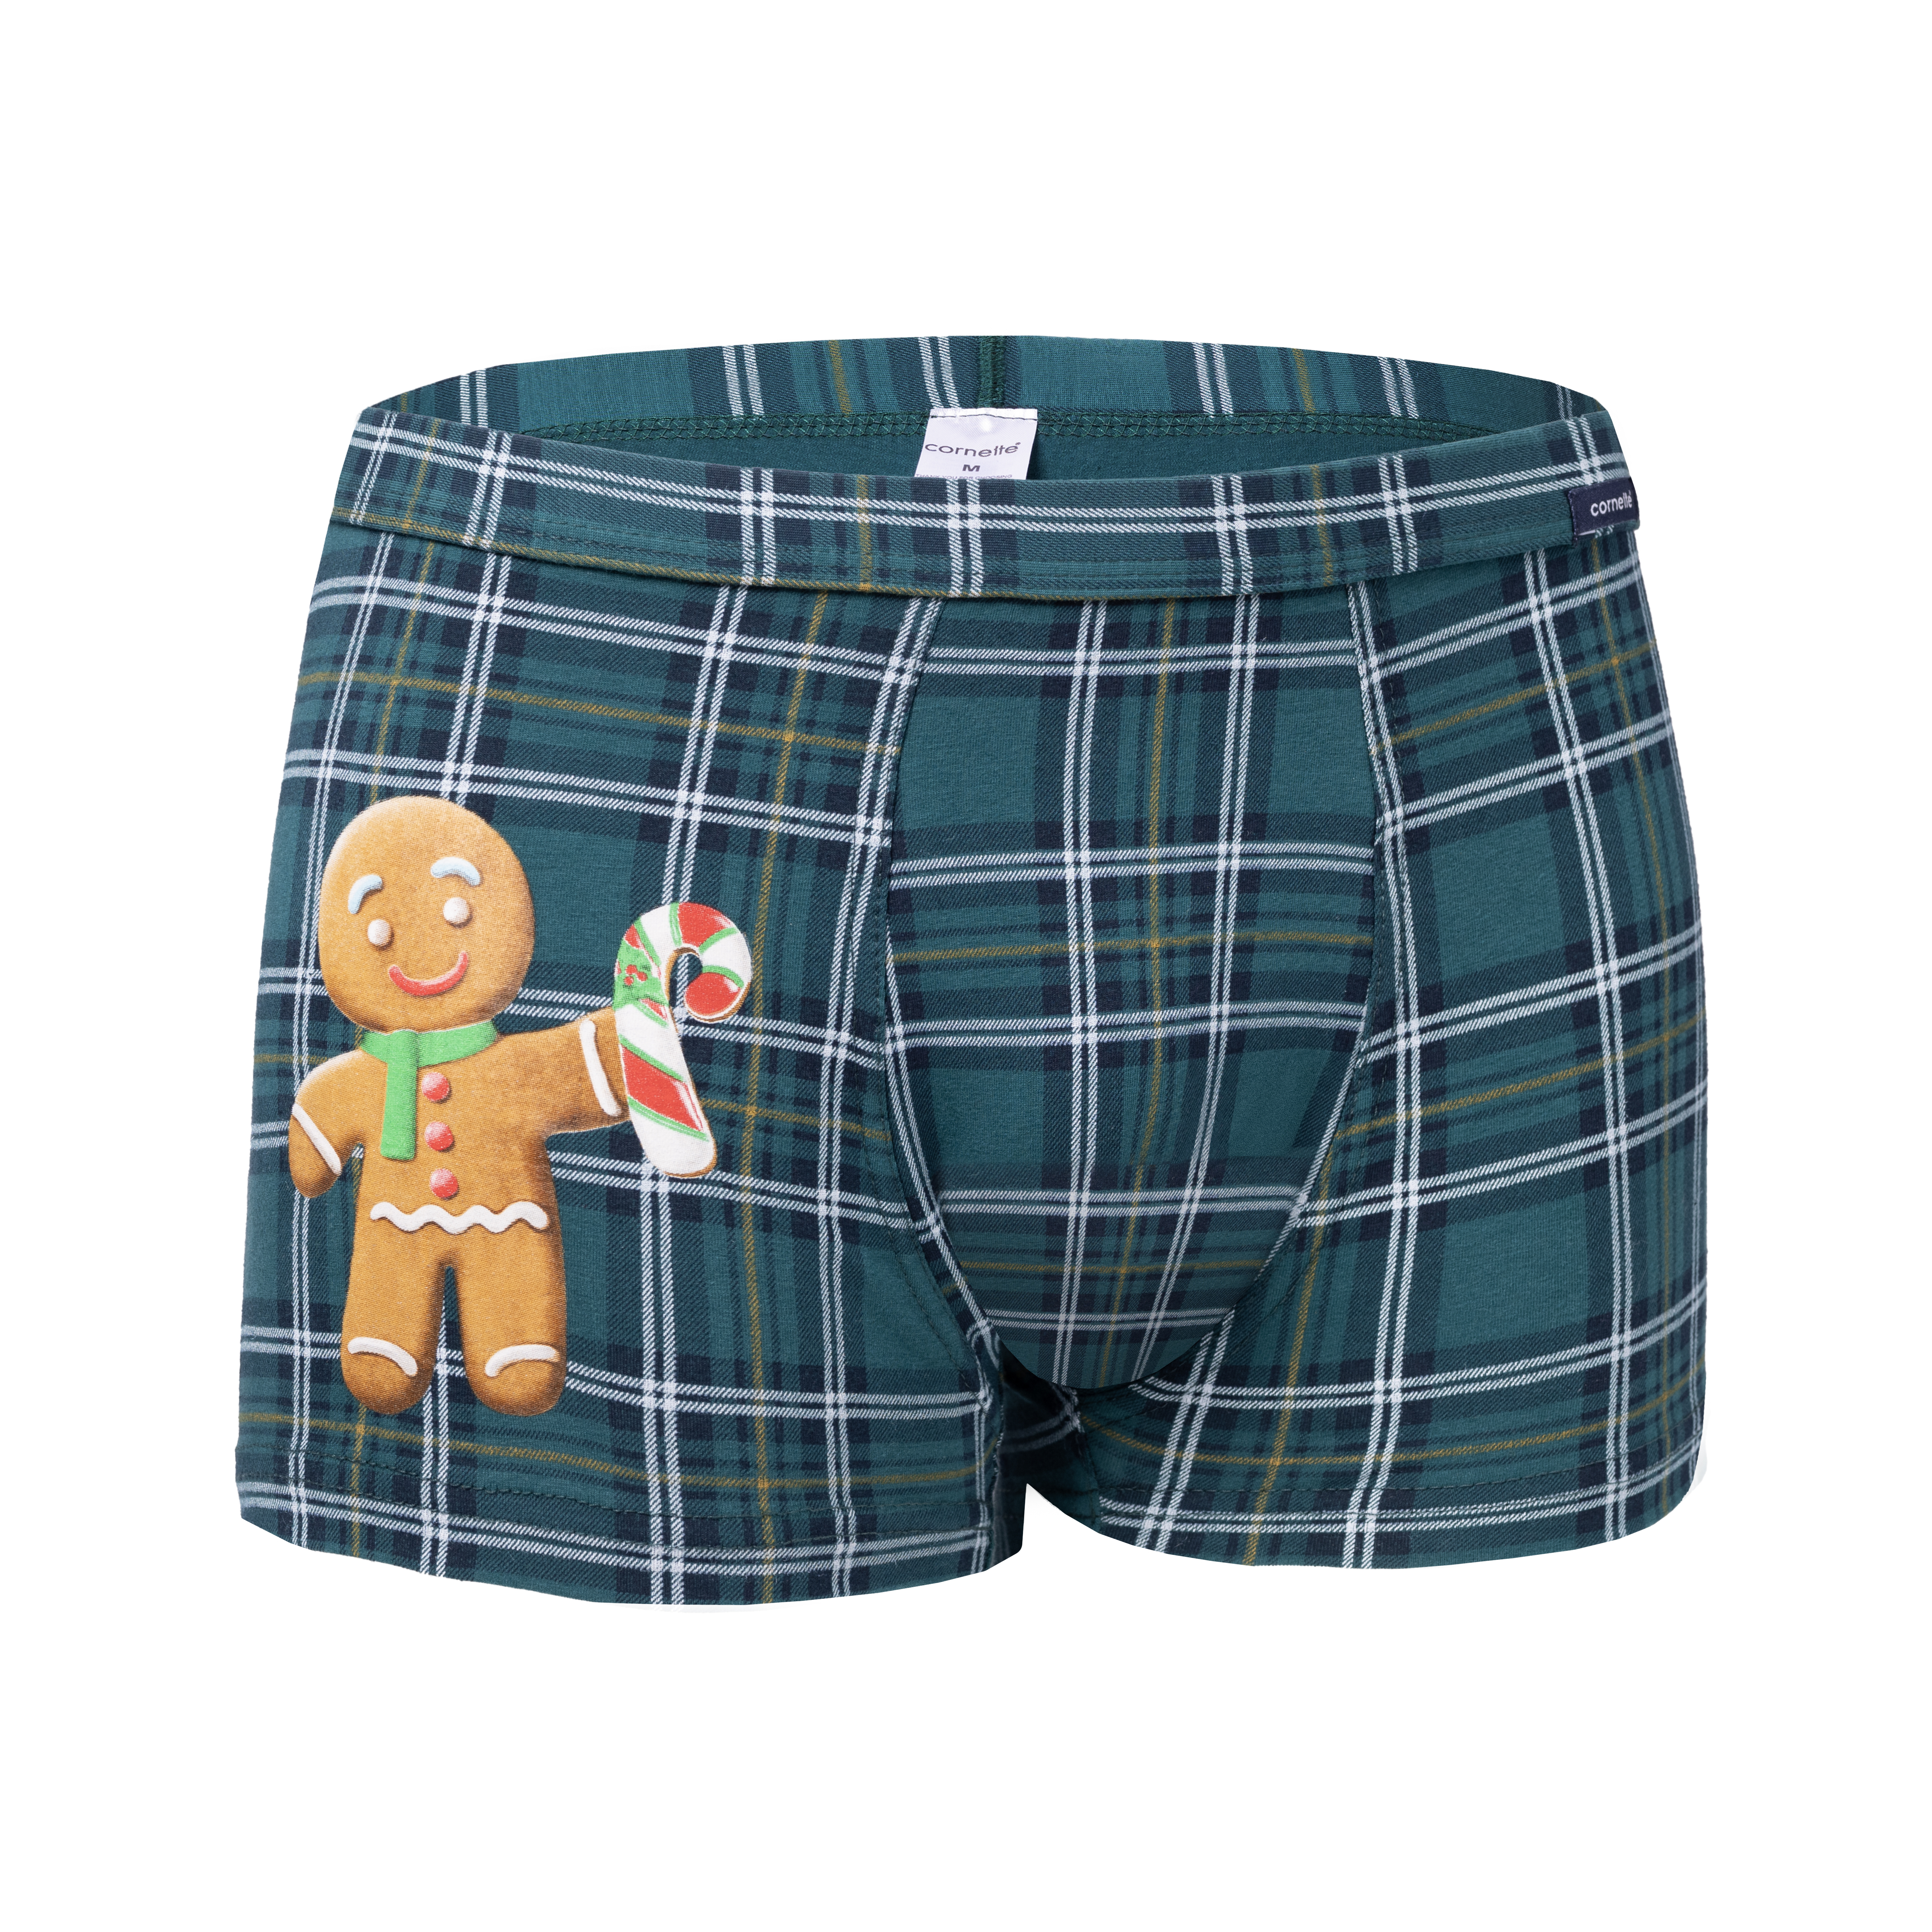 Cookie boxers 007/70 Green